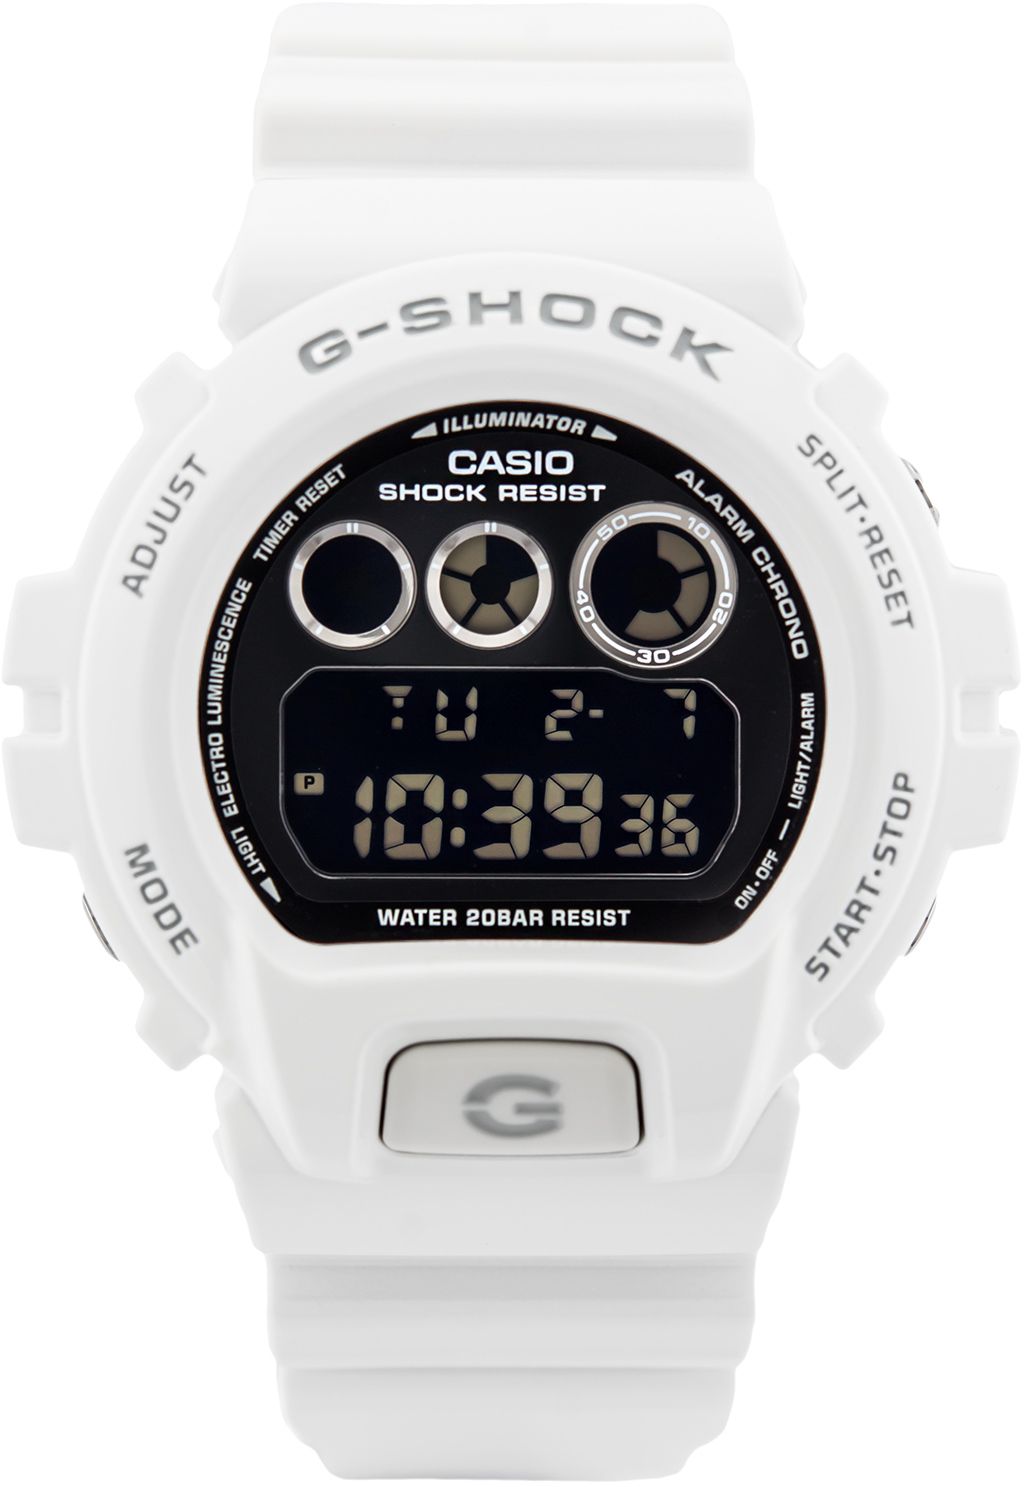 G-Shock Wholesale Price Online Malaysia